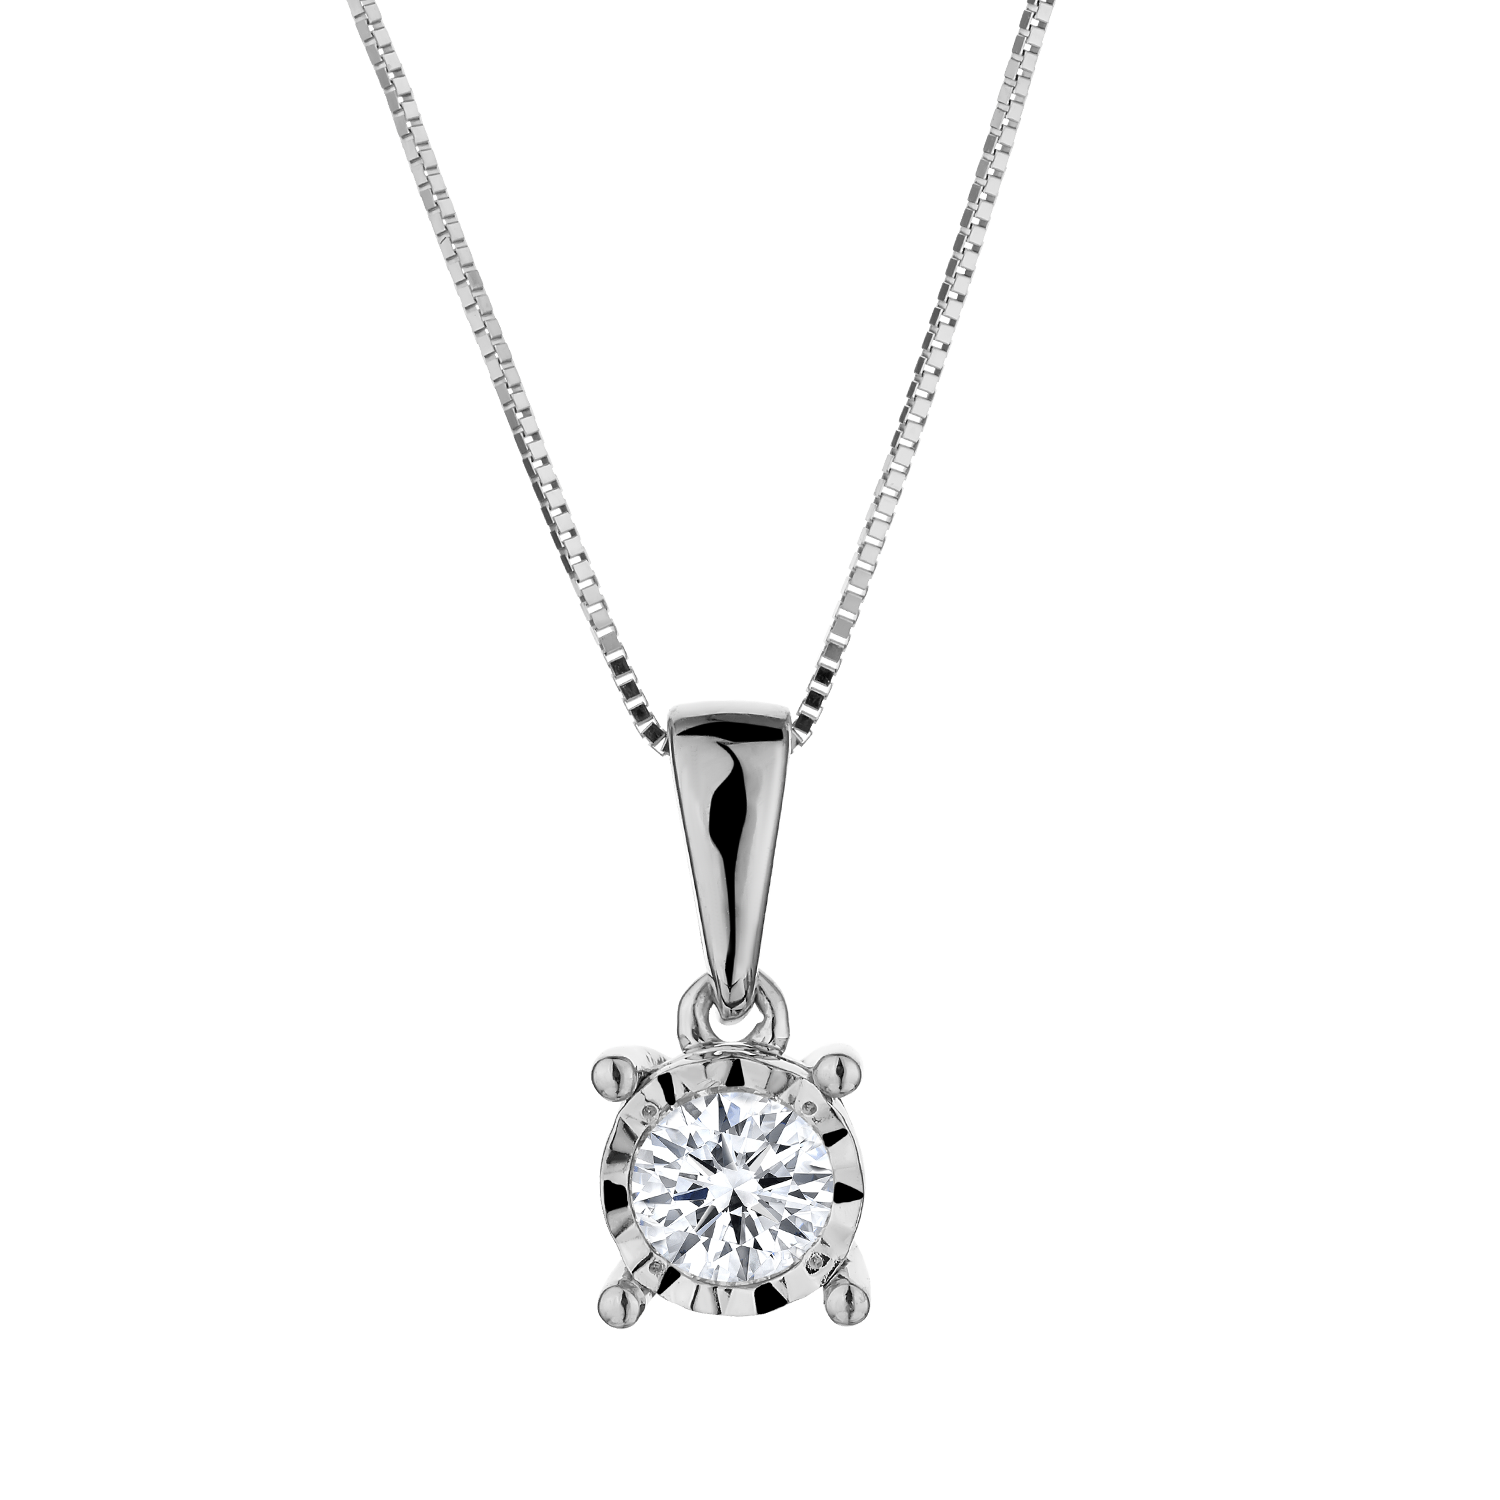 .33 Carat Diamond "Miracle" Pendant,  14kt White Gold. Necklaces and Pendants. Griffin Jewellery Designs.